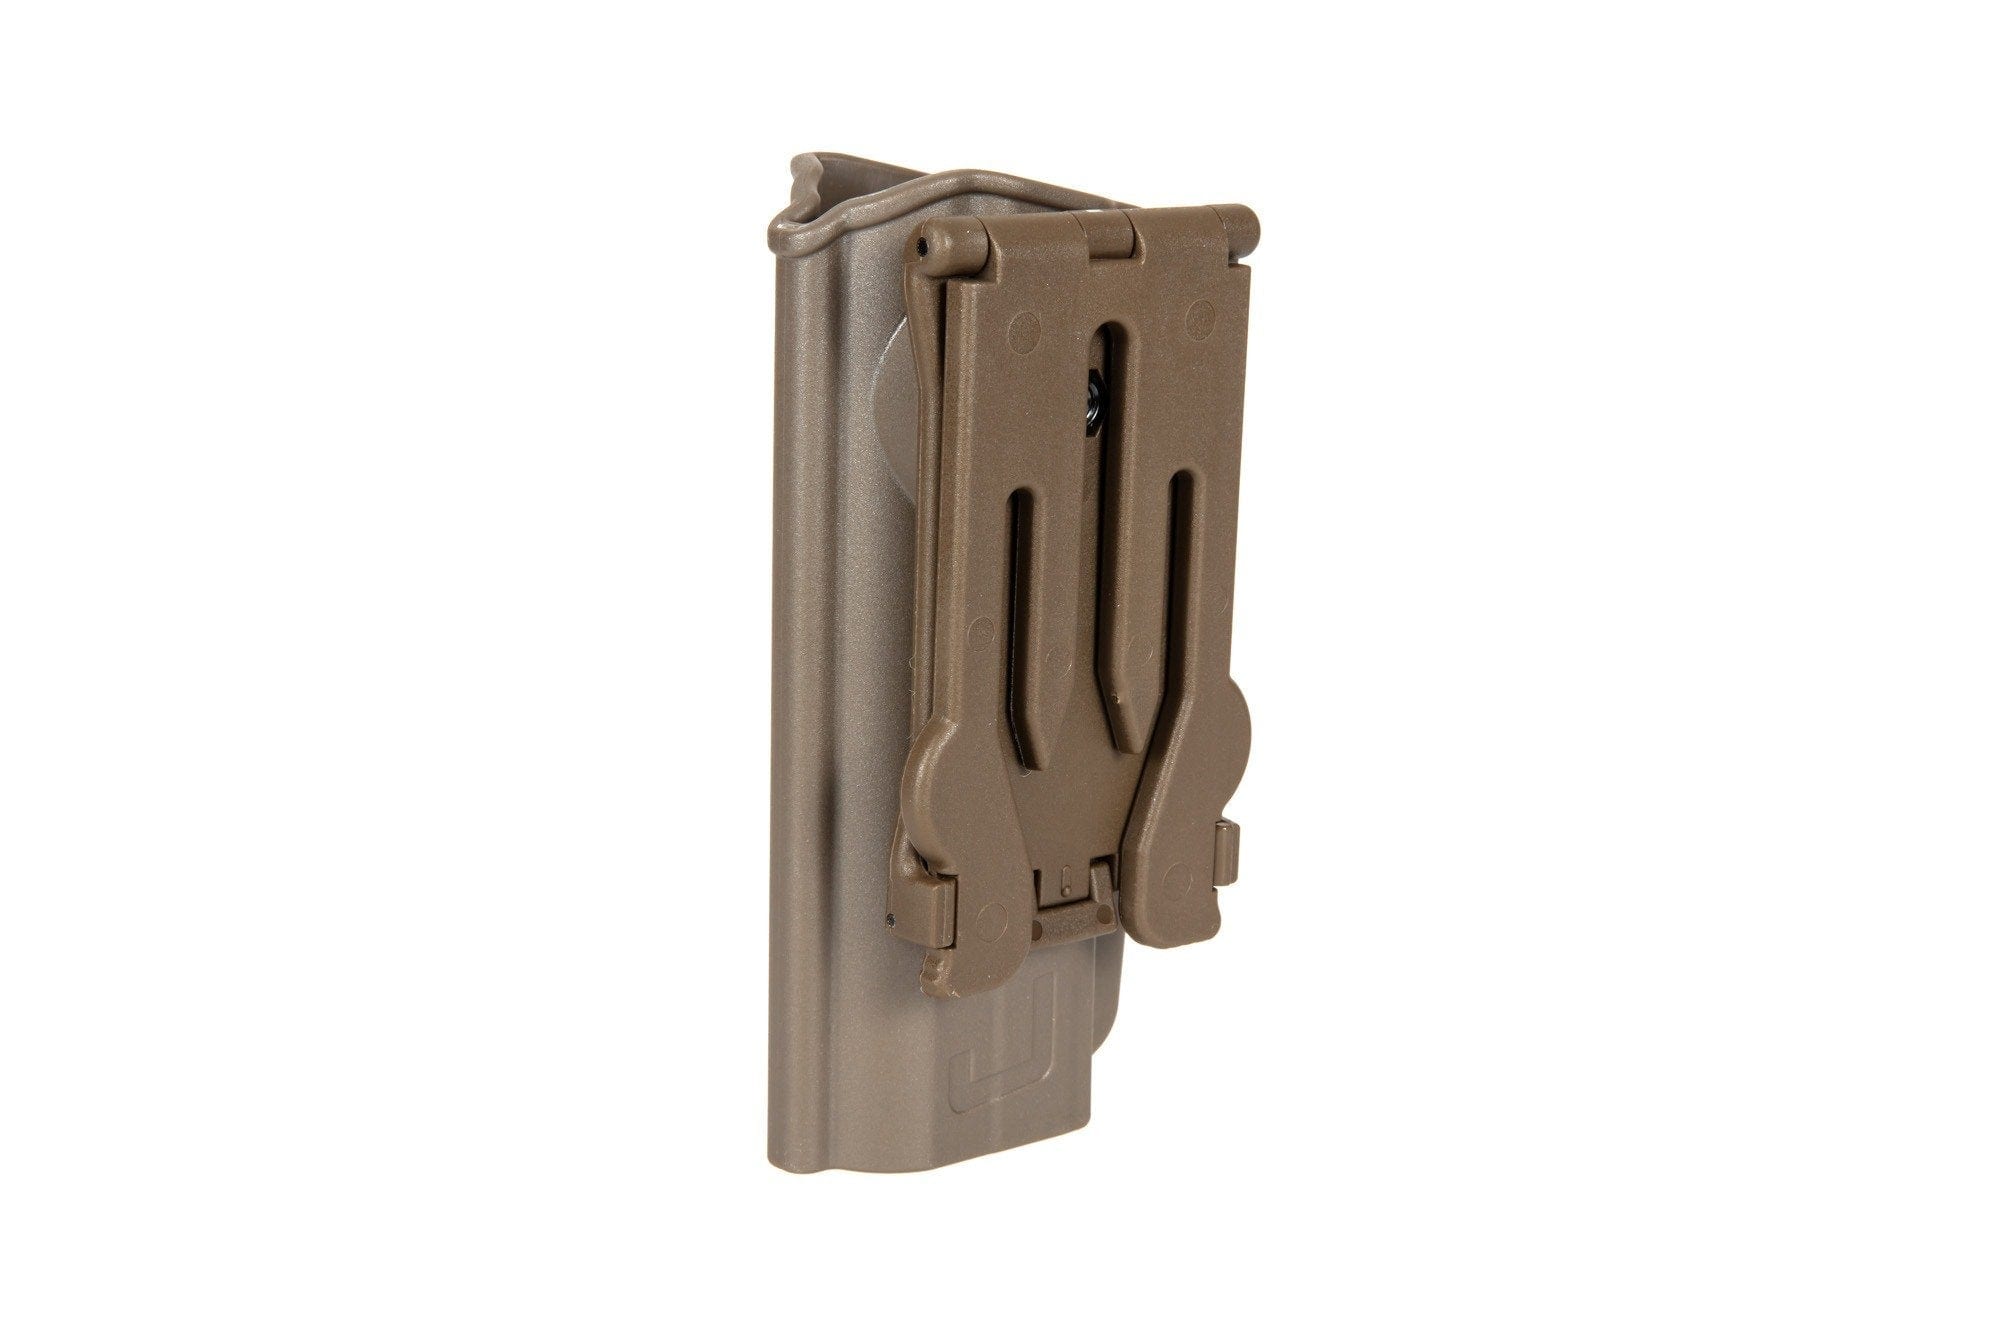 DEFENDER R-Holster for Colt 1911 pistols (MOLLE) - FDE by CYTAC on Airsoft Mania Europe